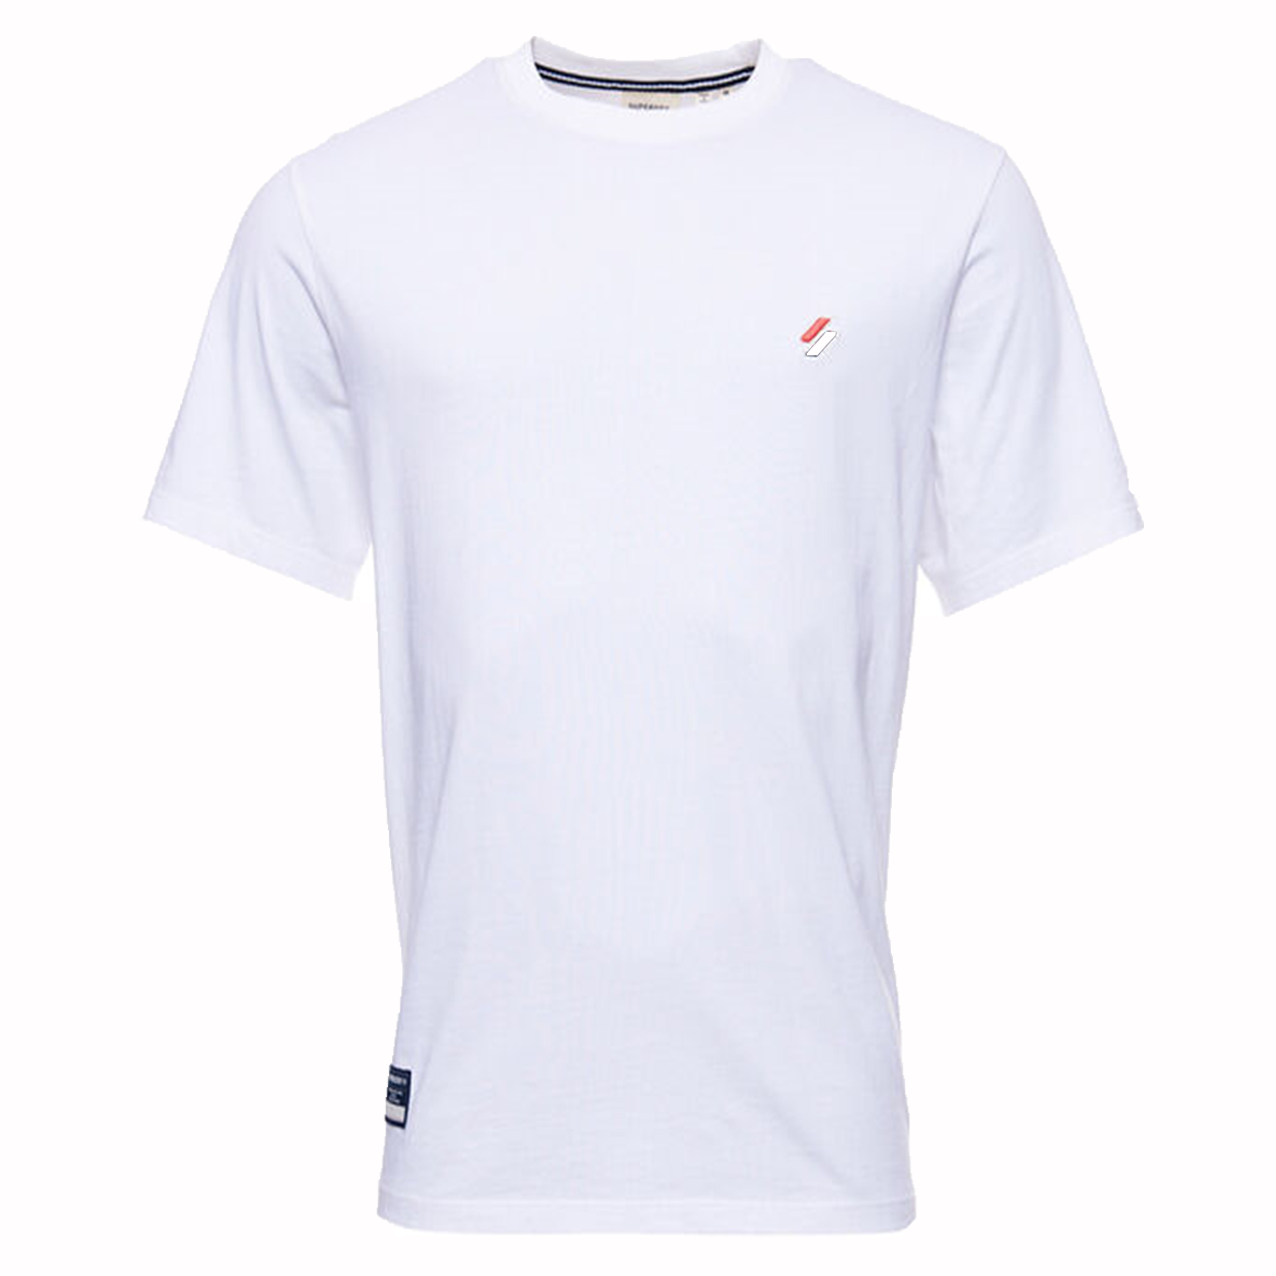 SUPERDRY CODE ESSENTIAL TEE WHITE M1011185A-01C